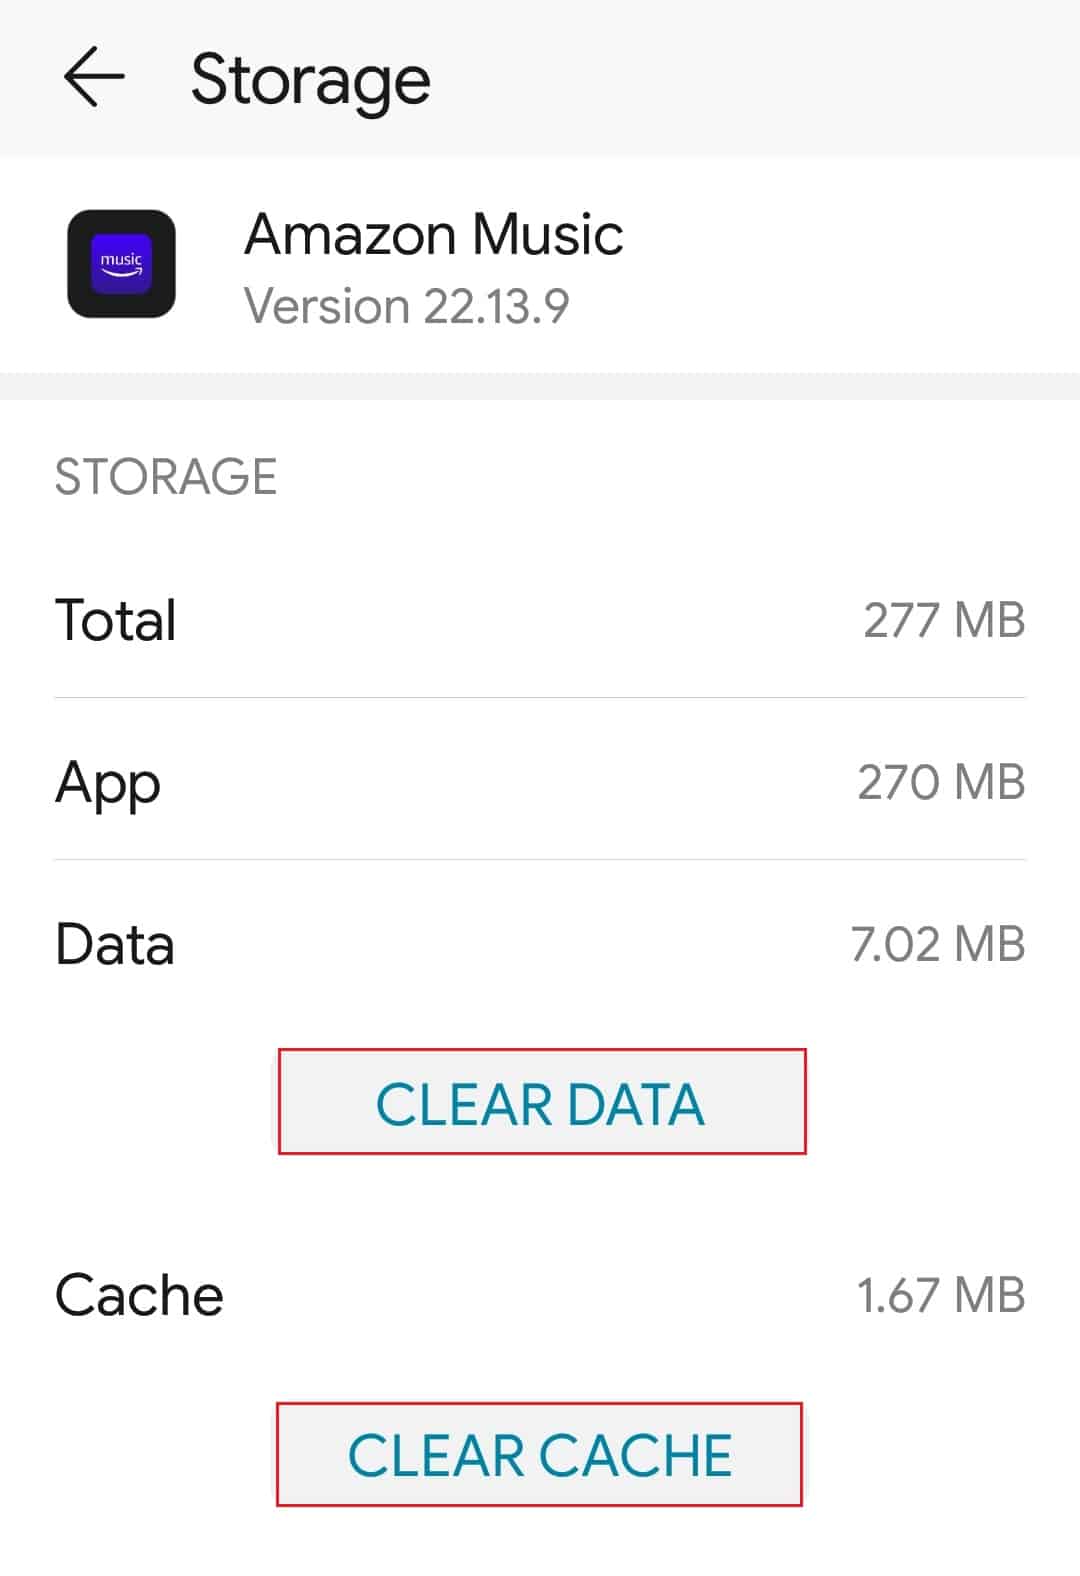 clear data and clear cache in Amazon Music app Storage setting android